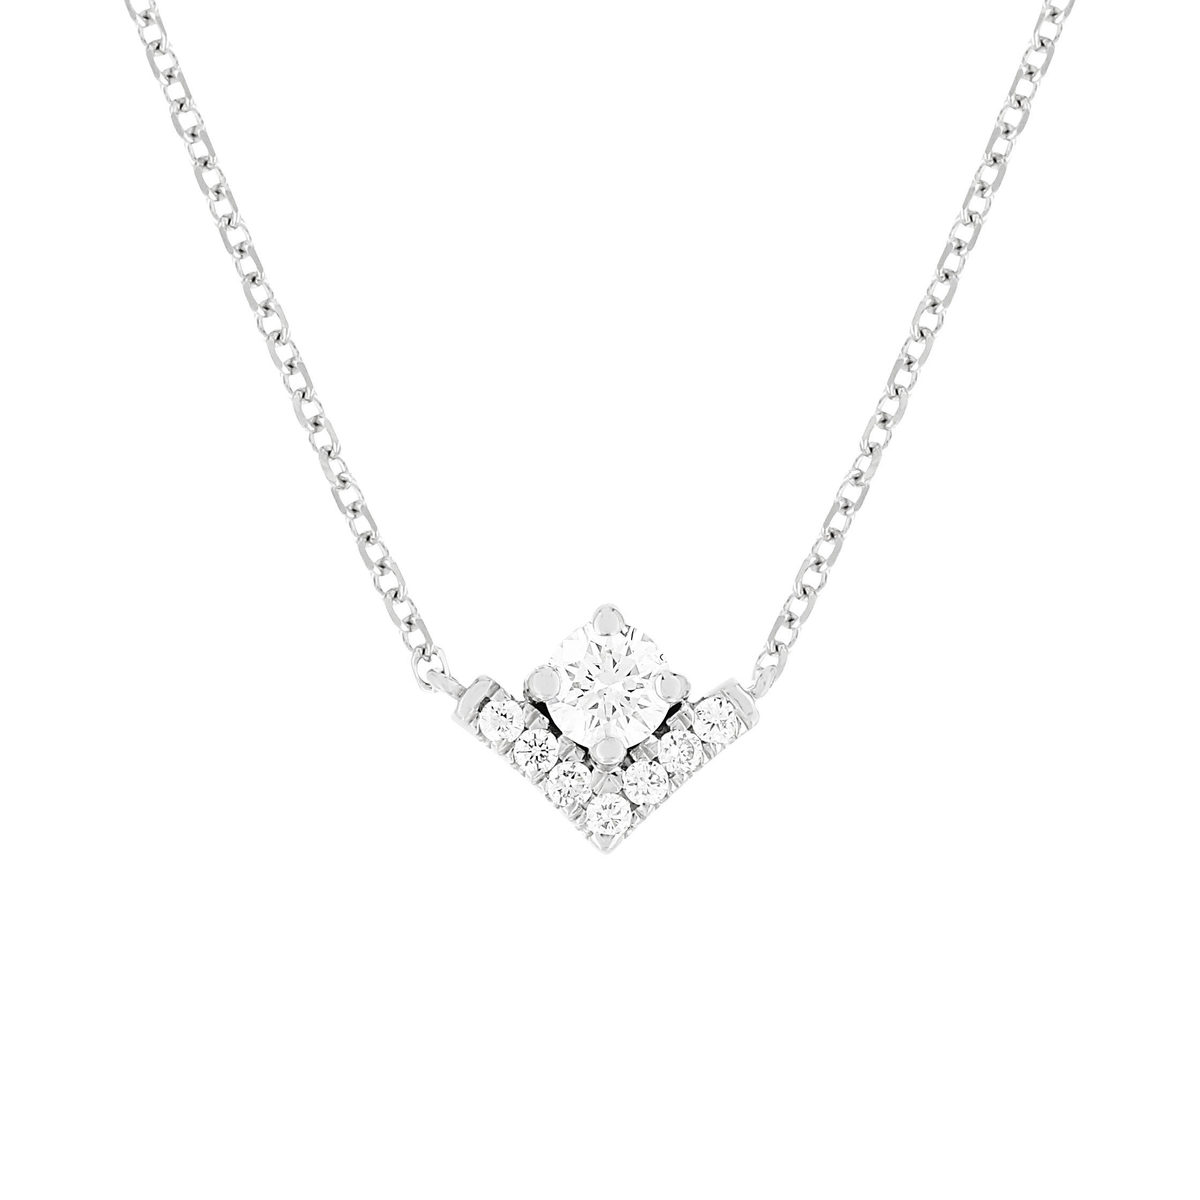 Collier or blanc 750 diamants synthétiques 0.20 carat